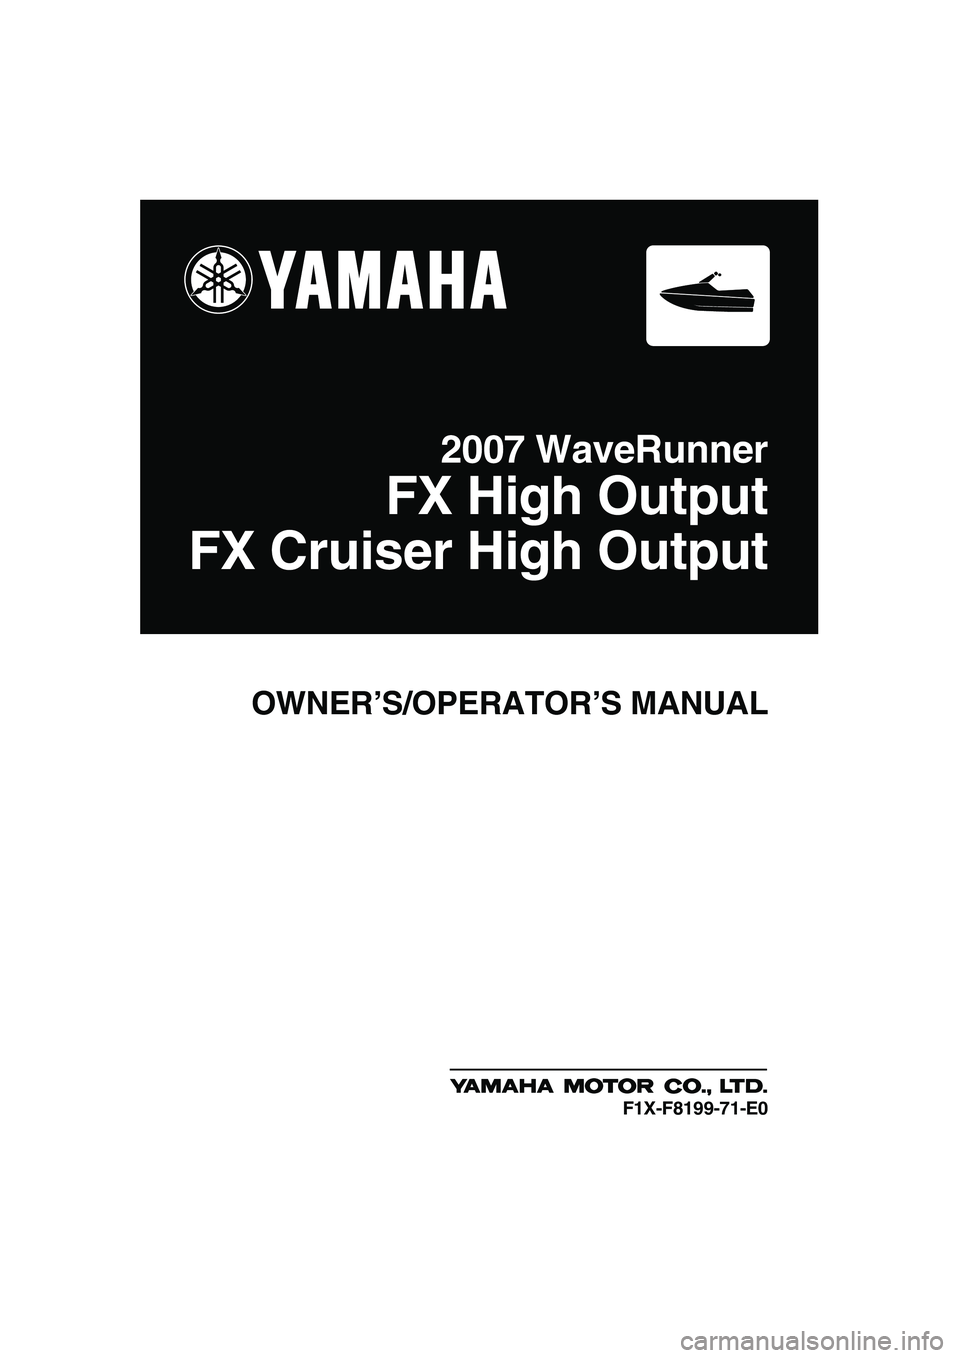 YAMAHA FX HO 2007  Owners Manual OWNER’S/OPERATOR’S MANUAL
2007 WaveRunner
FX High Output
FX Cruiser High Output
F1X-F8199-71-E0
UF1X71E0.book  Page 1  Tuesday, September 26, 2006  9:52 AM 